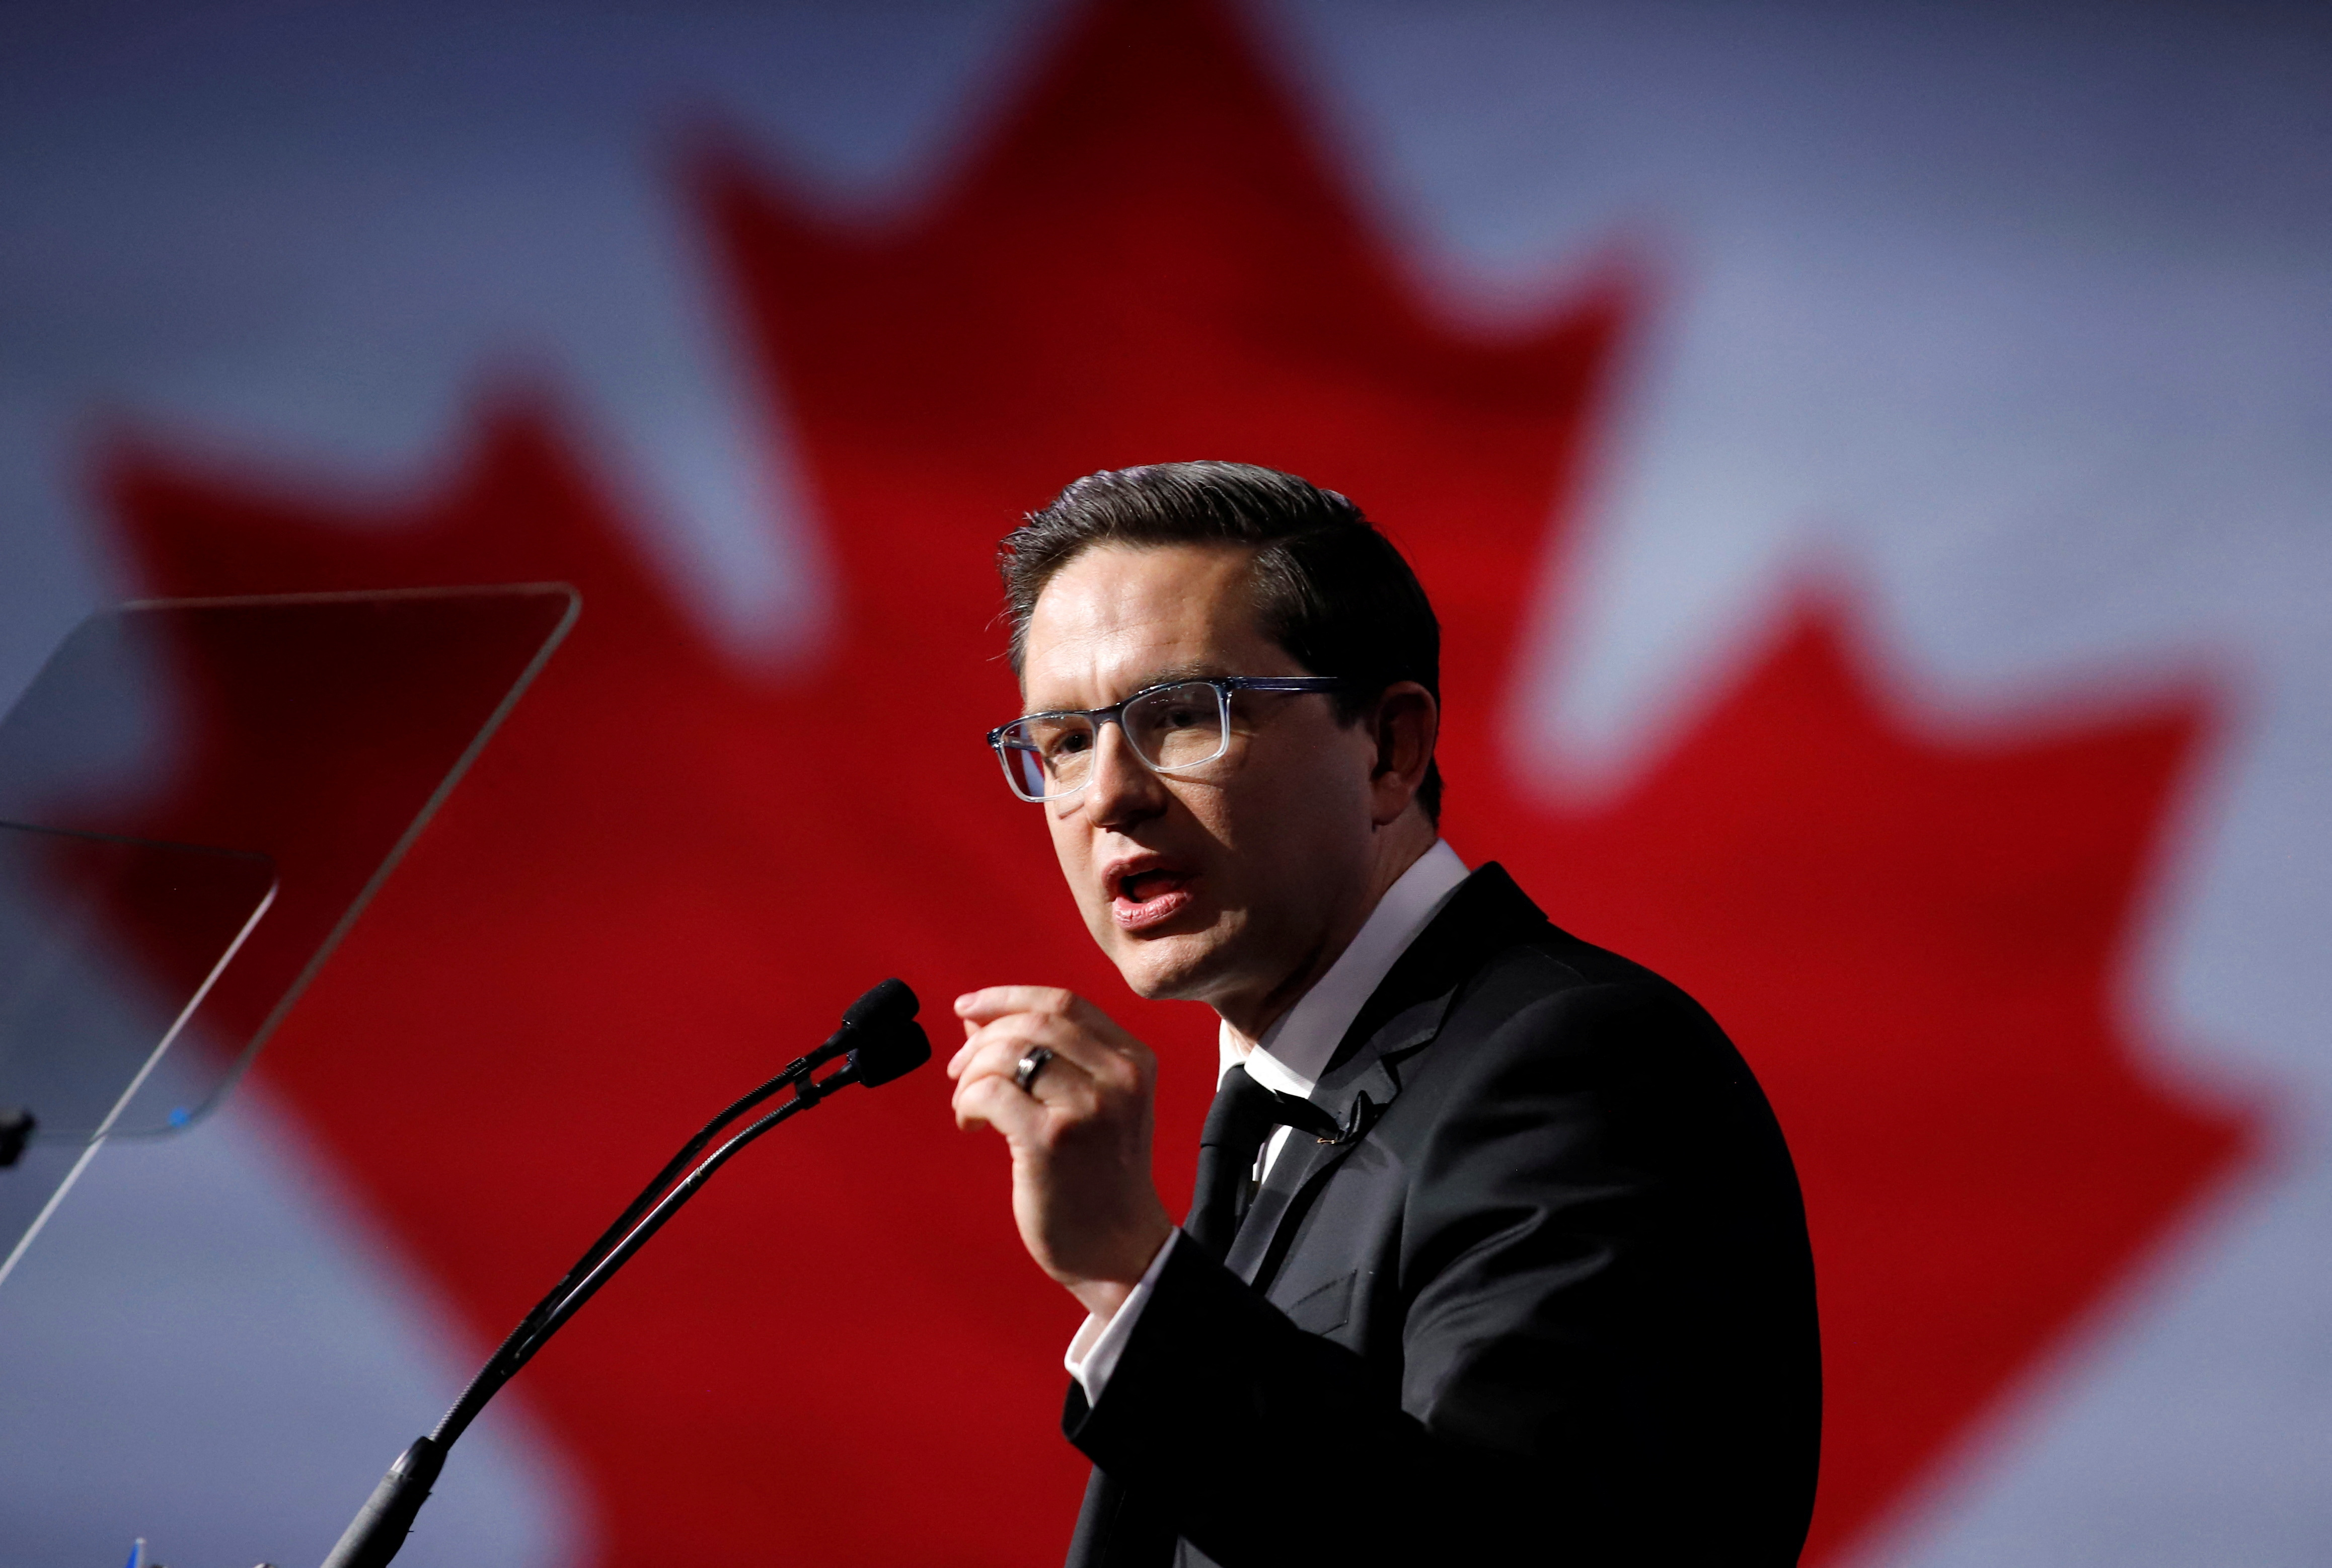 Canada’s Trudeau takes aim at new Conservative leader Pouillet